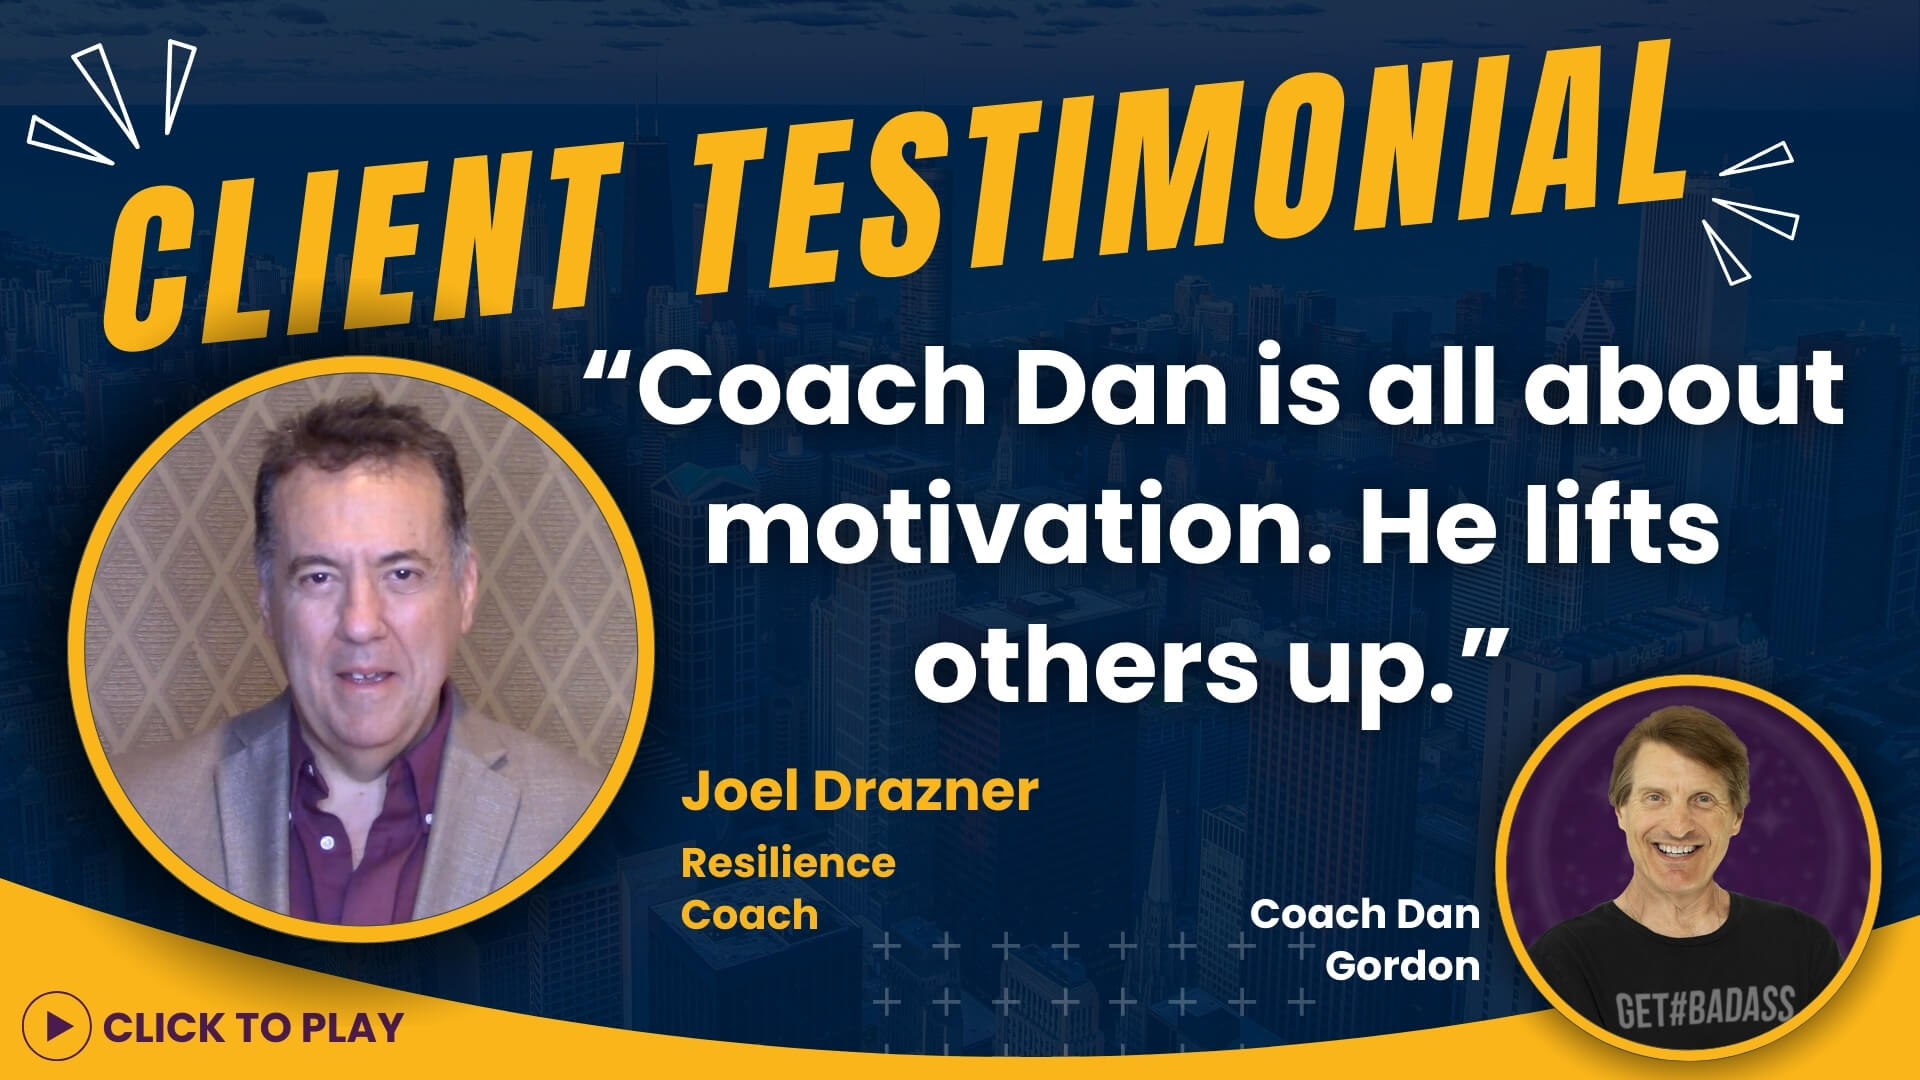 Joel Drazner, a resilience coach, dressed in a smart casual outfit, gives a testimonial emphasizing Coach Dan Gordon's motivational spirit.